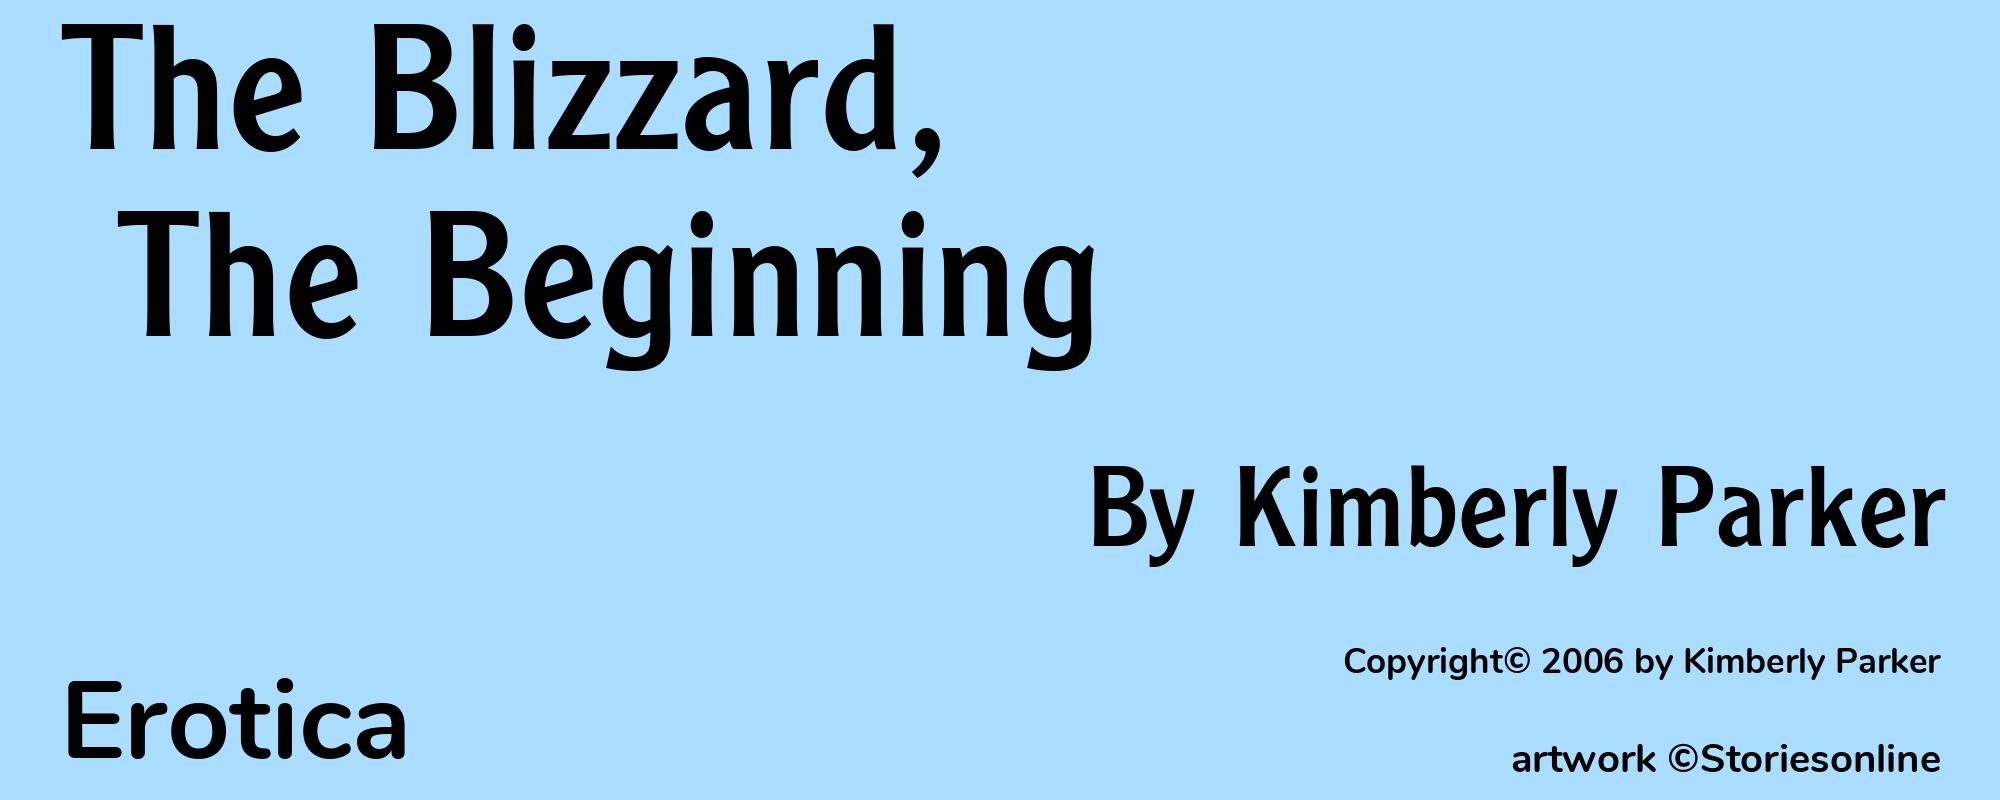 The Blizzard, The Beginning - Cover